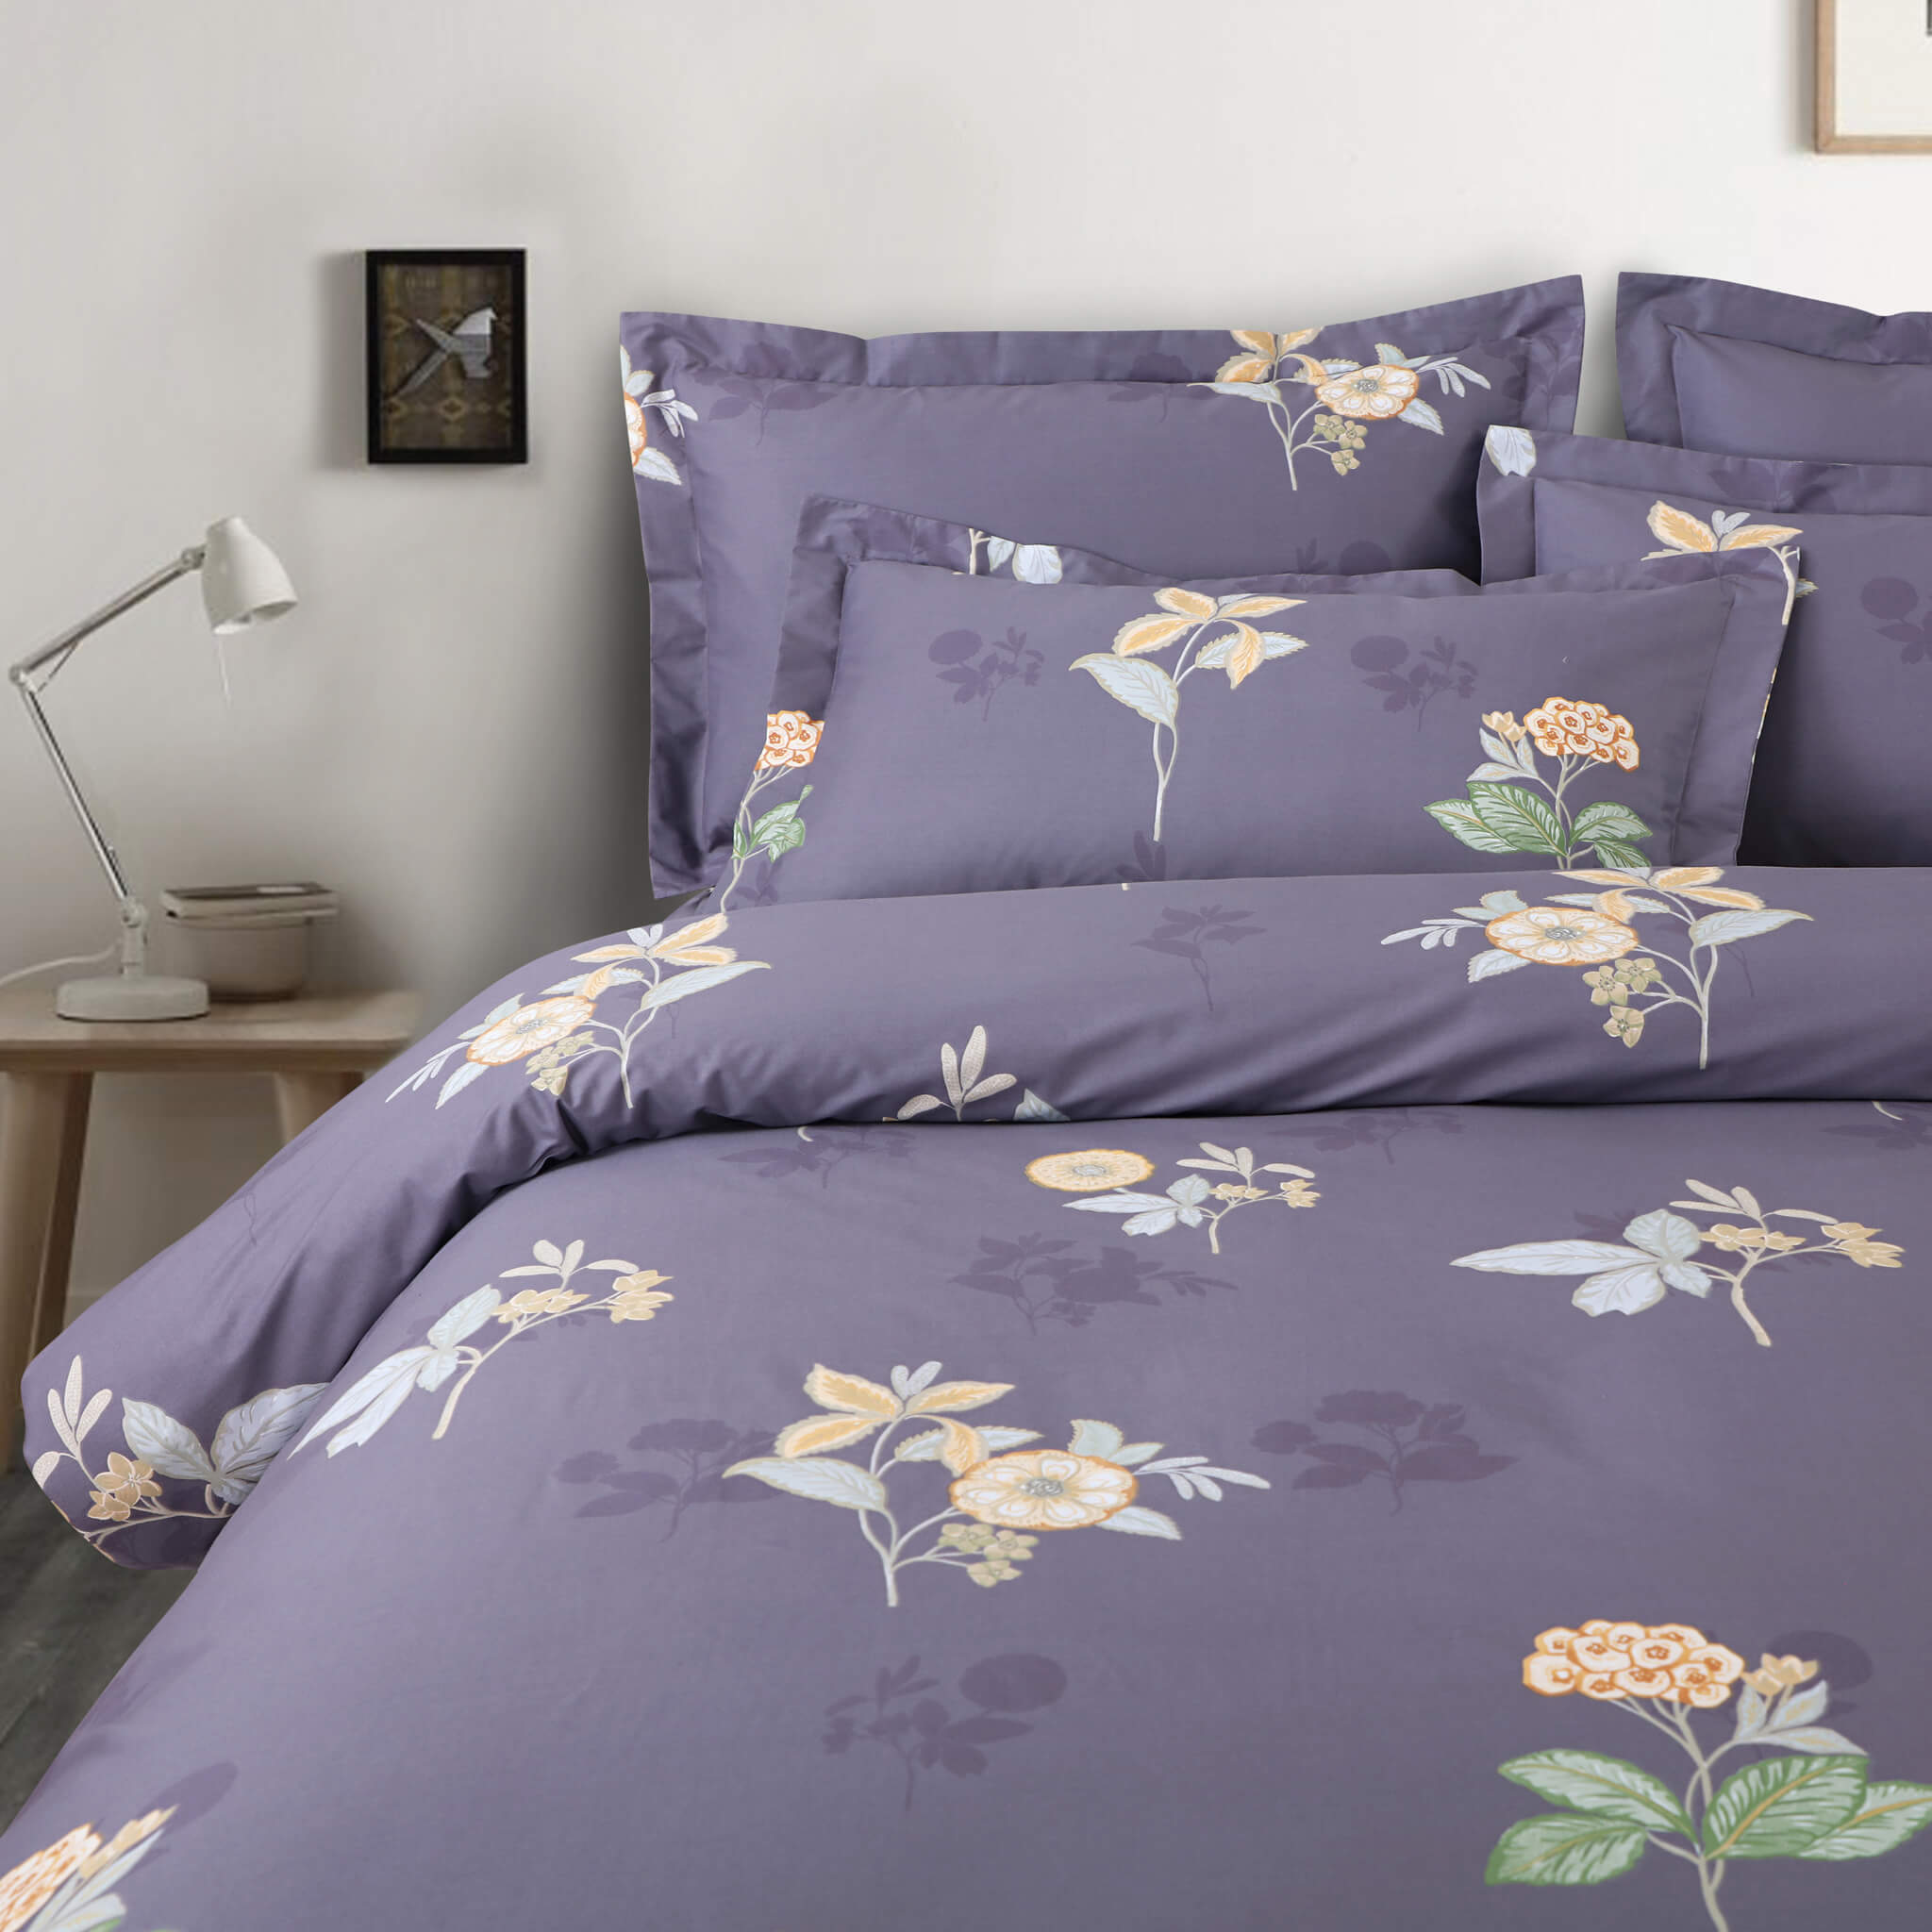 Add a Touch of Elegance with Our Grey Floral Bedding Sets – MALAKO